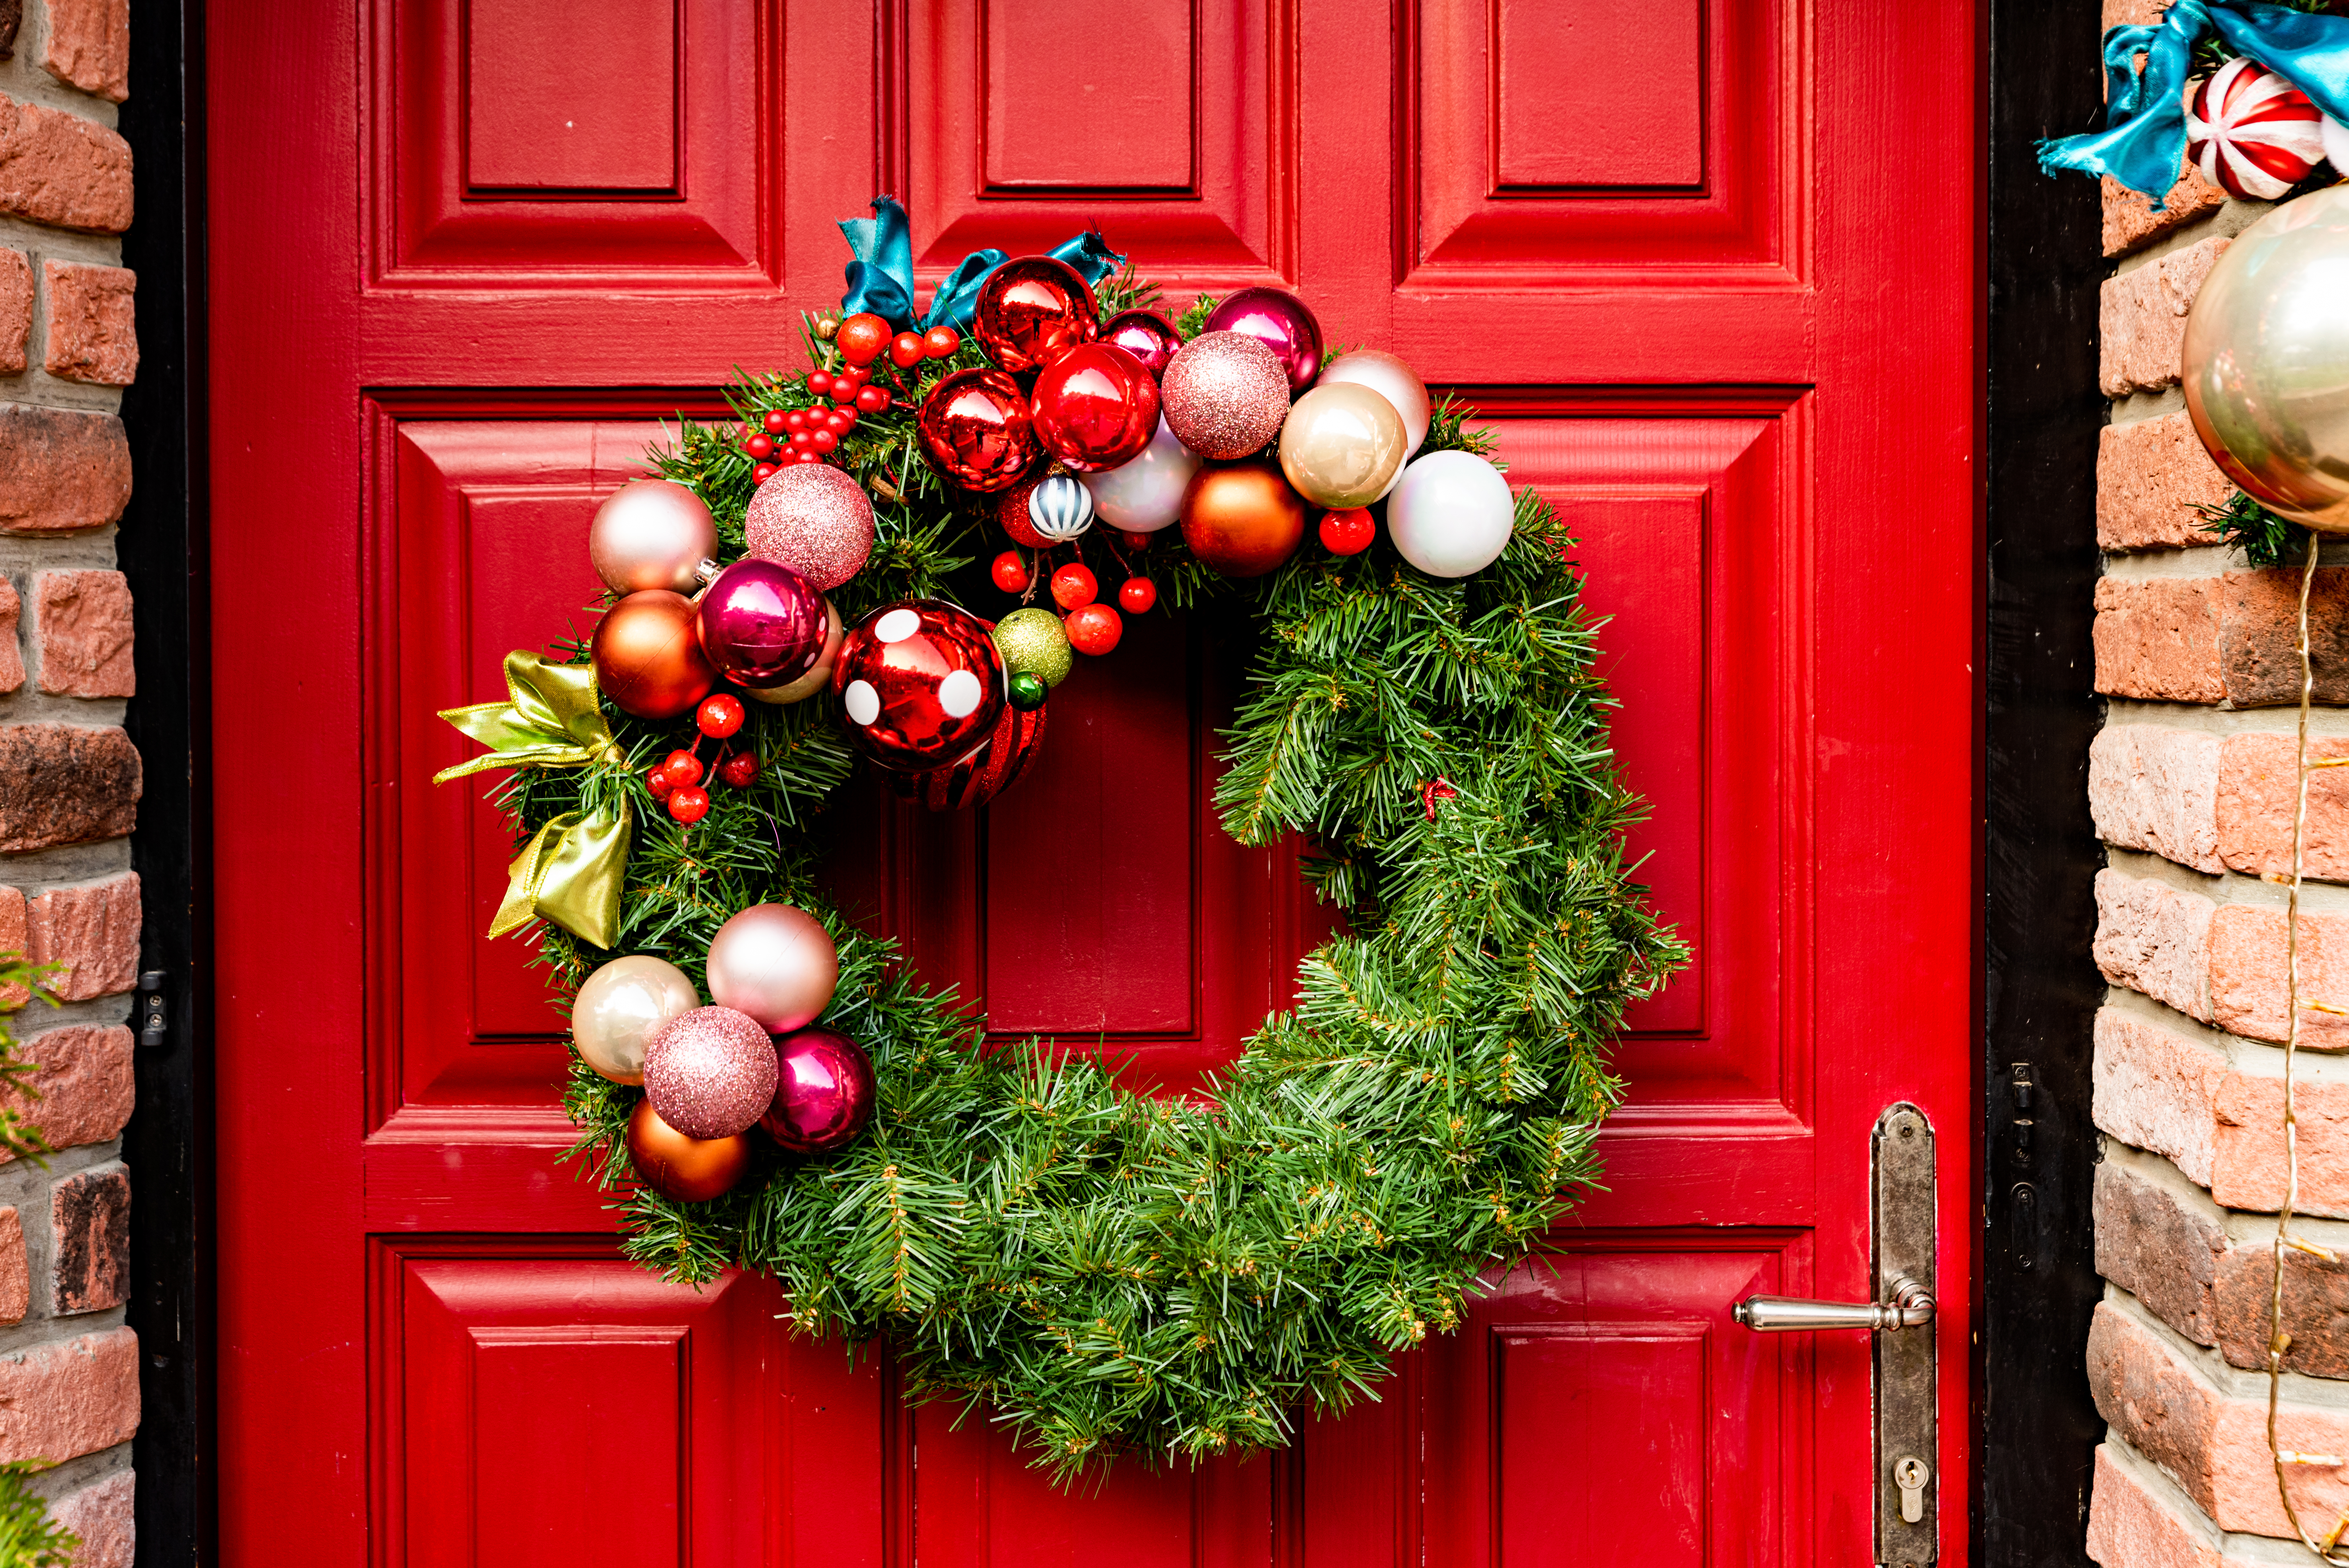 We have four ways to save cash and create your own Christmas wreath